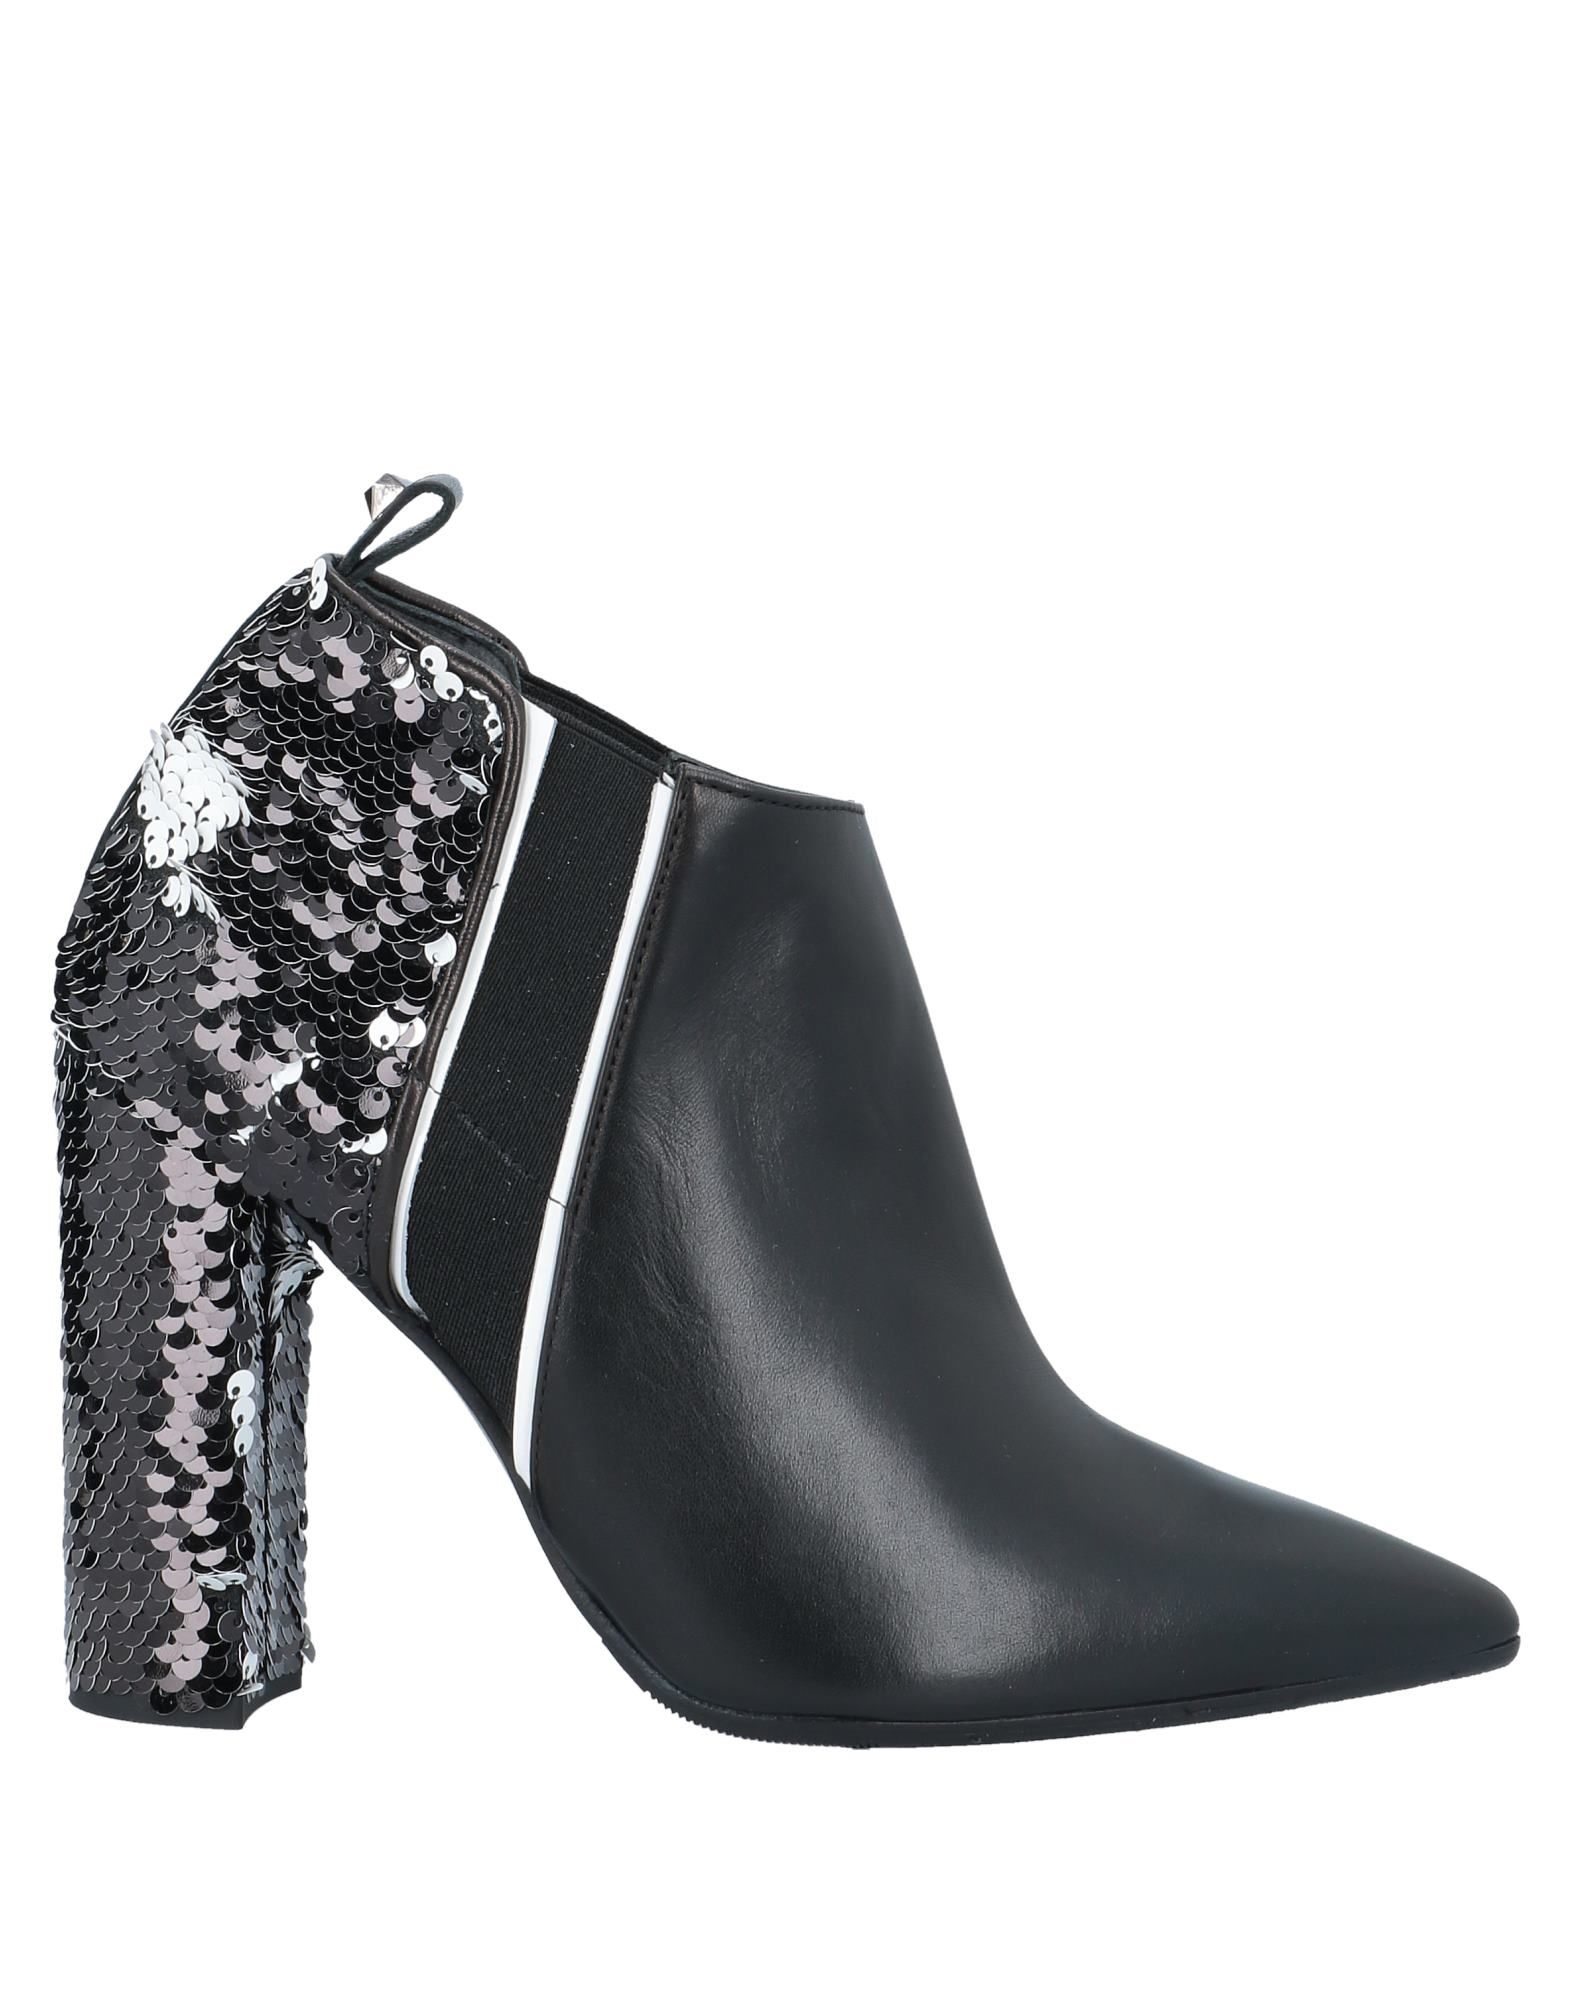 ISLO ISABELLA LORUSSO Ankle boots - Item 11710234